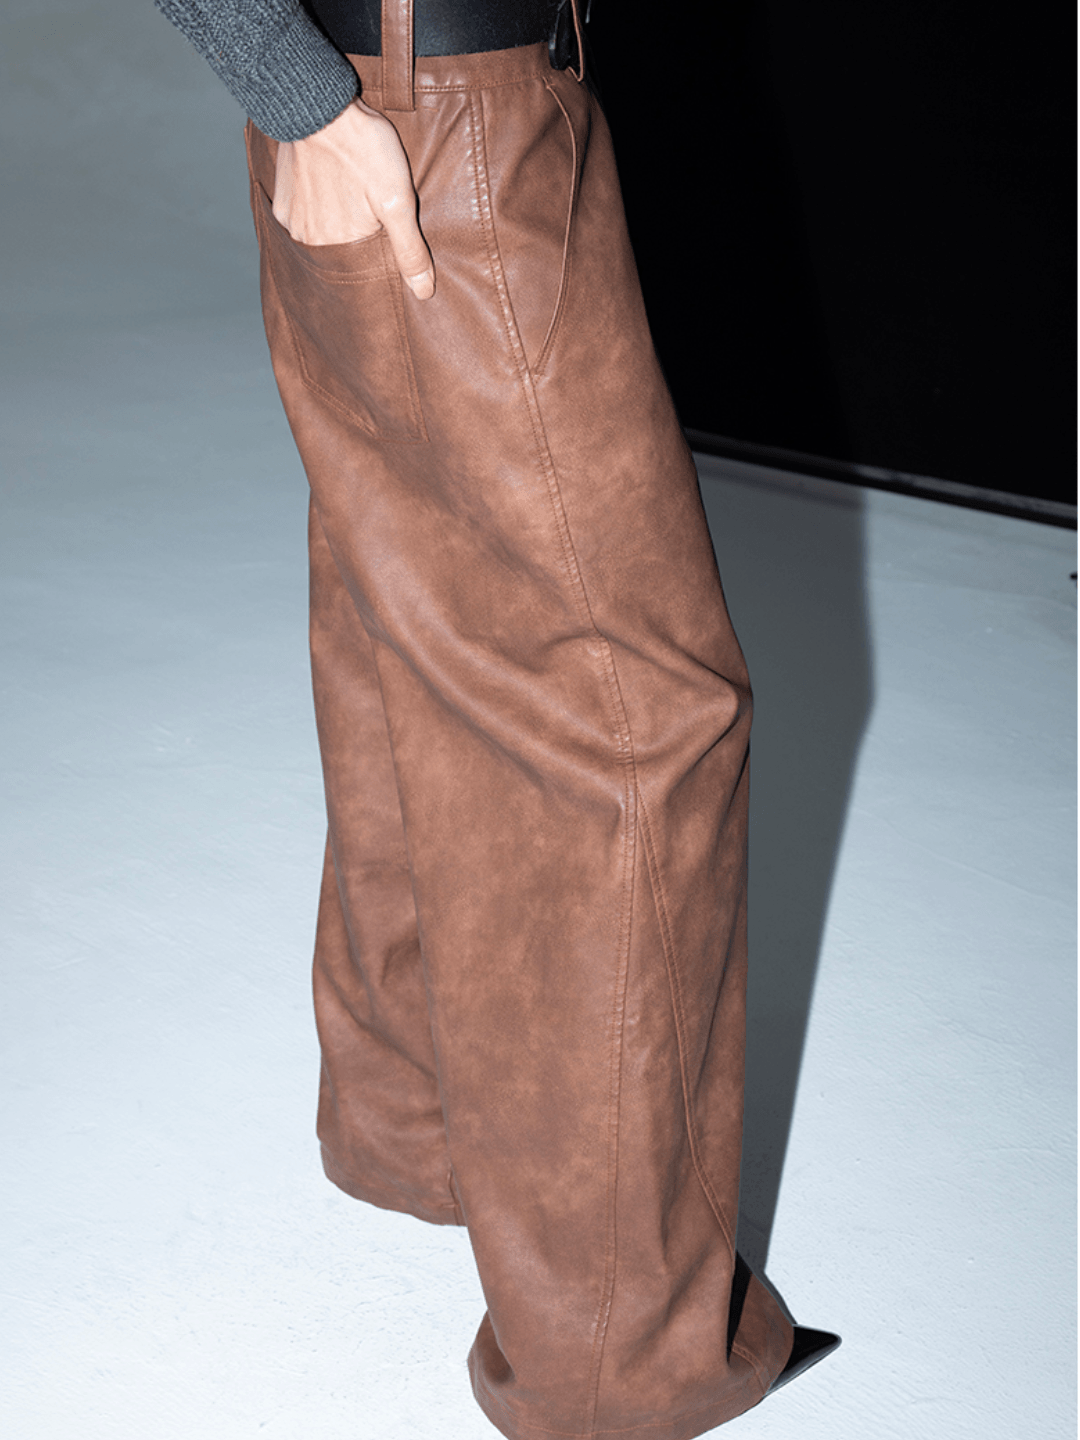 design retro brown washed leather pants na767